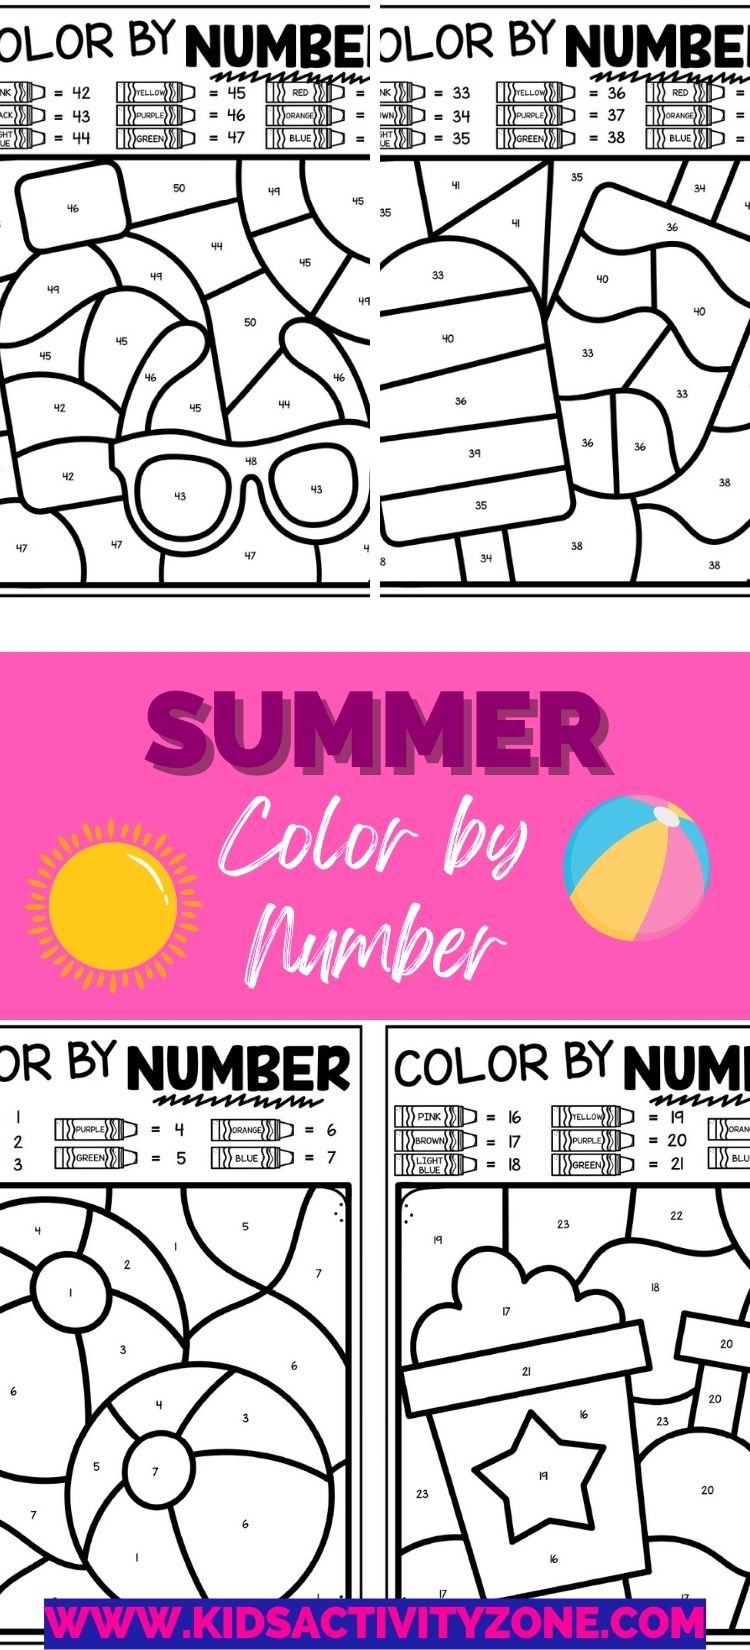 Rainy days during the summer can be a drag, but don't fret! Print off these Free Printable Summer Color By Numbers sheets. Tons of different summer scenes that the kids can color while stuck inside!